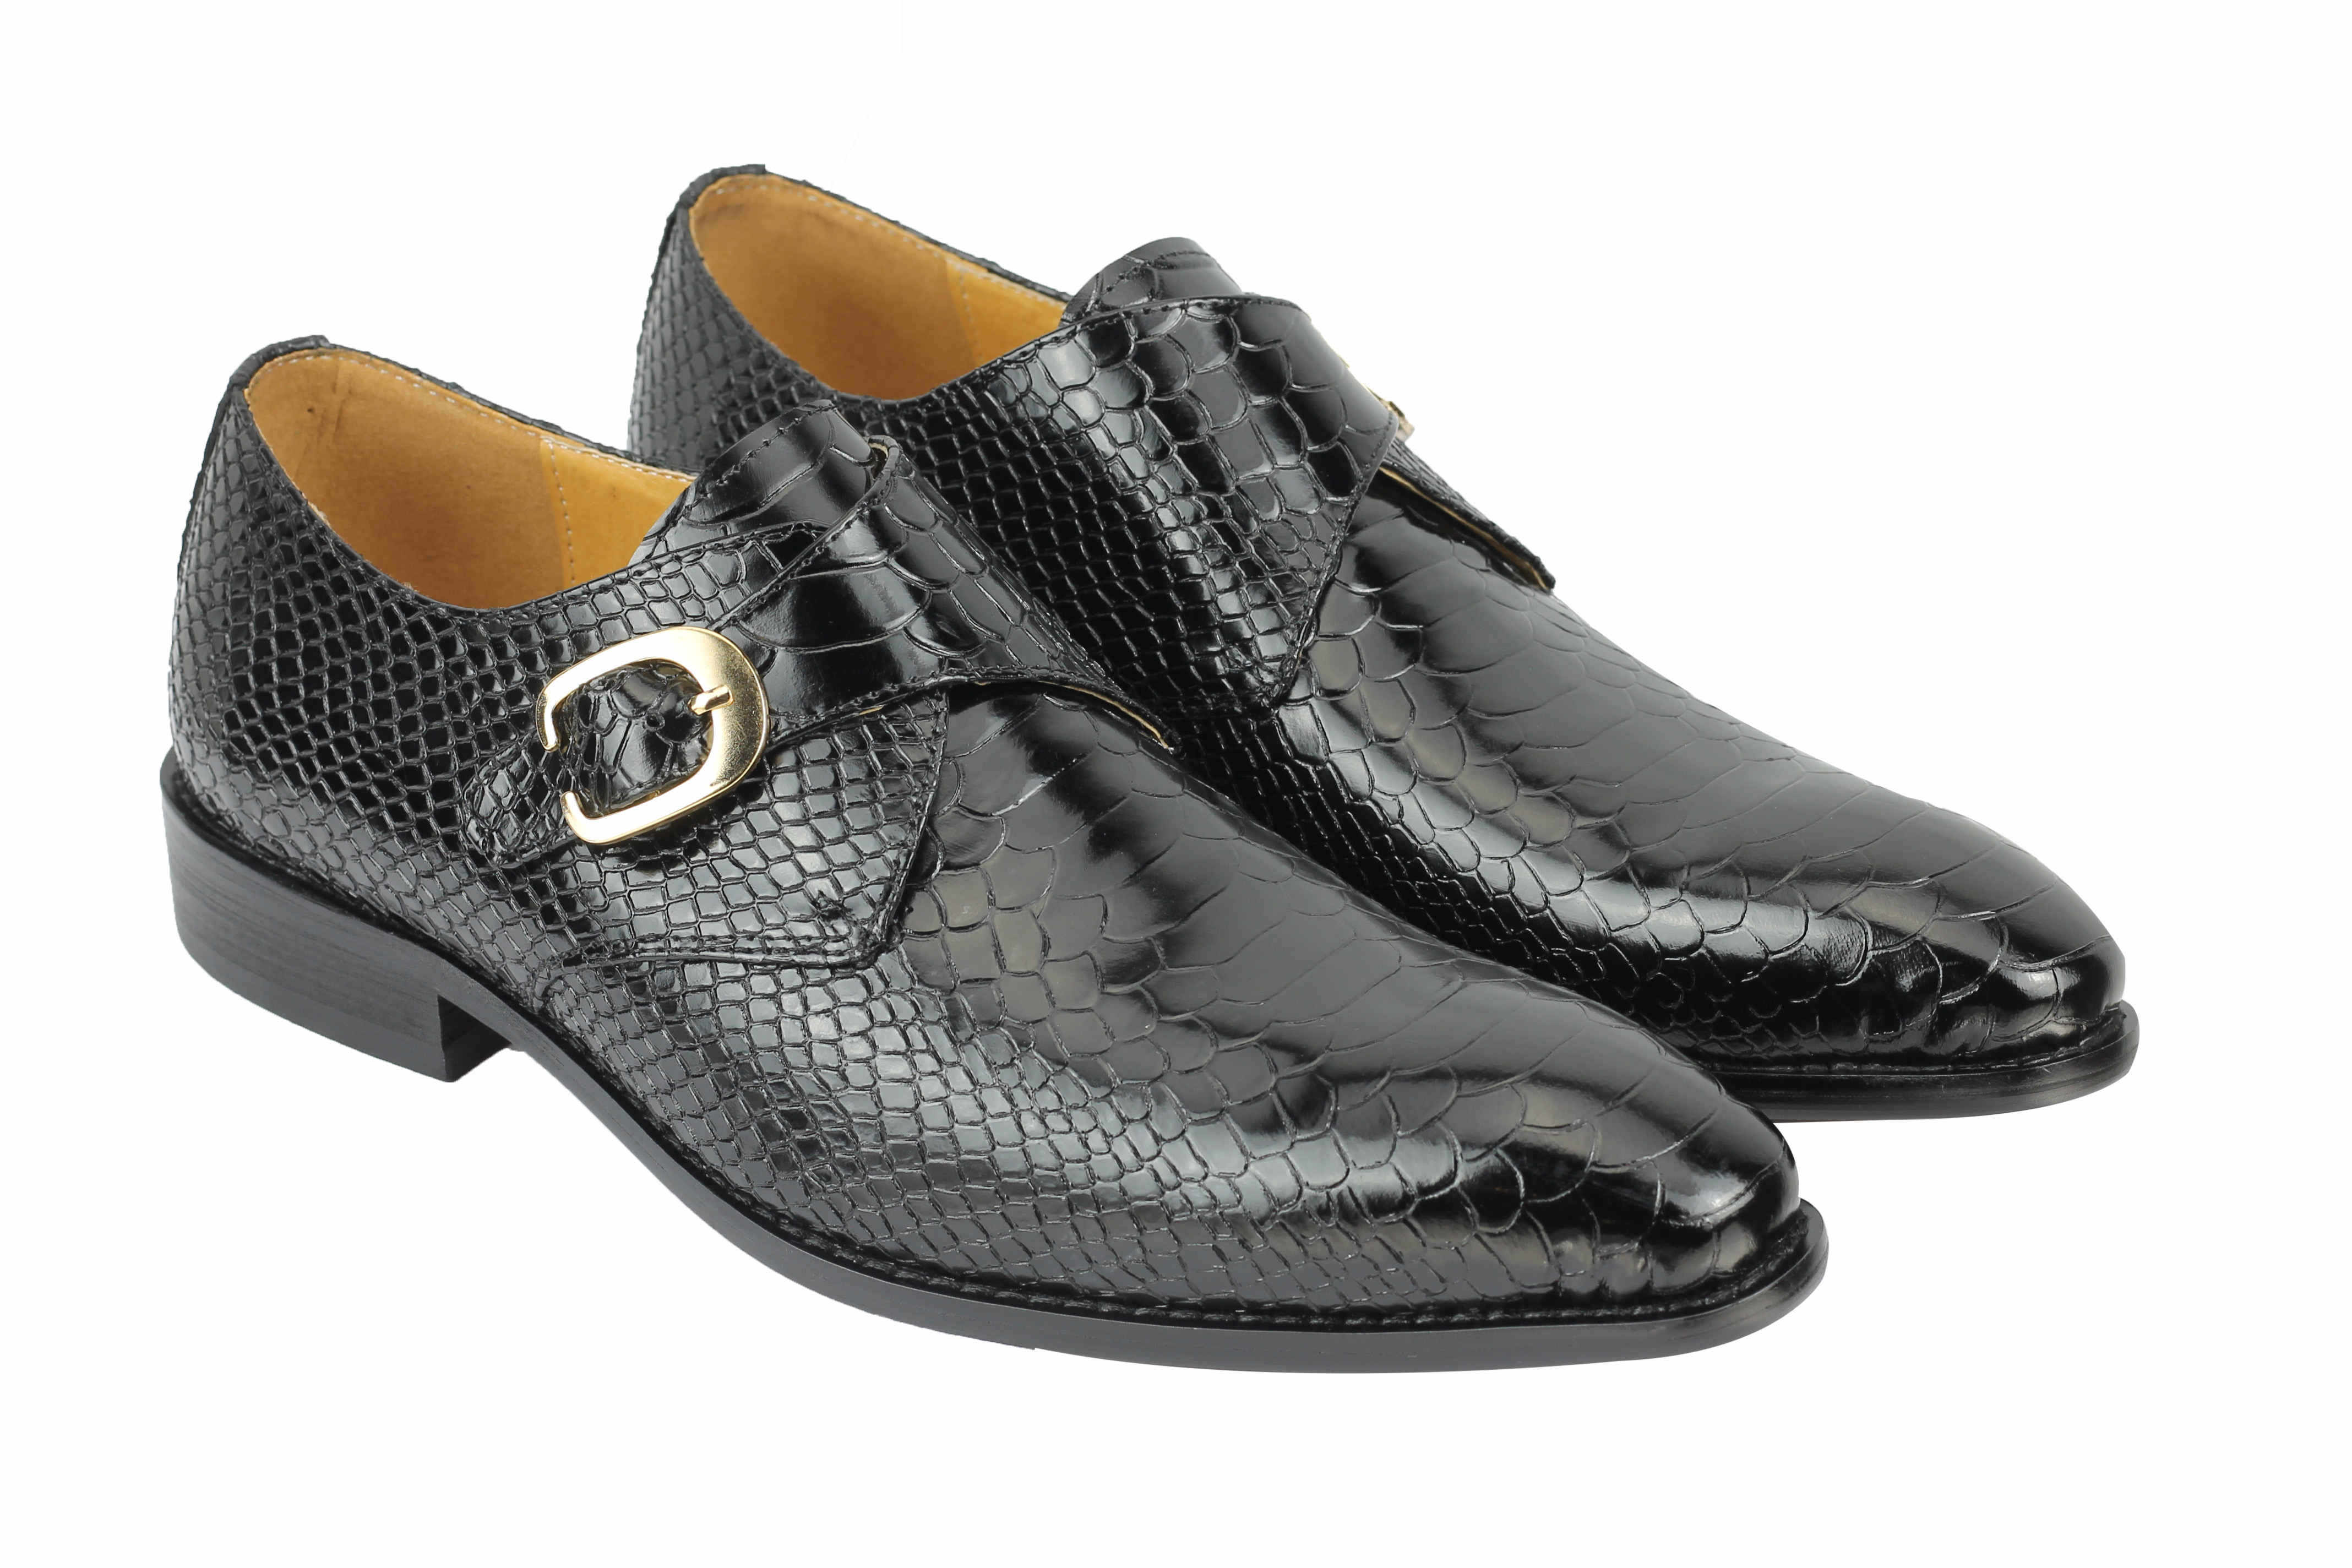 Real Leather Crocodile Effect Monk Strap Loafers